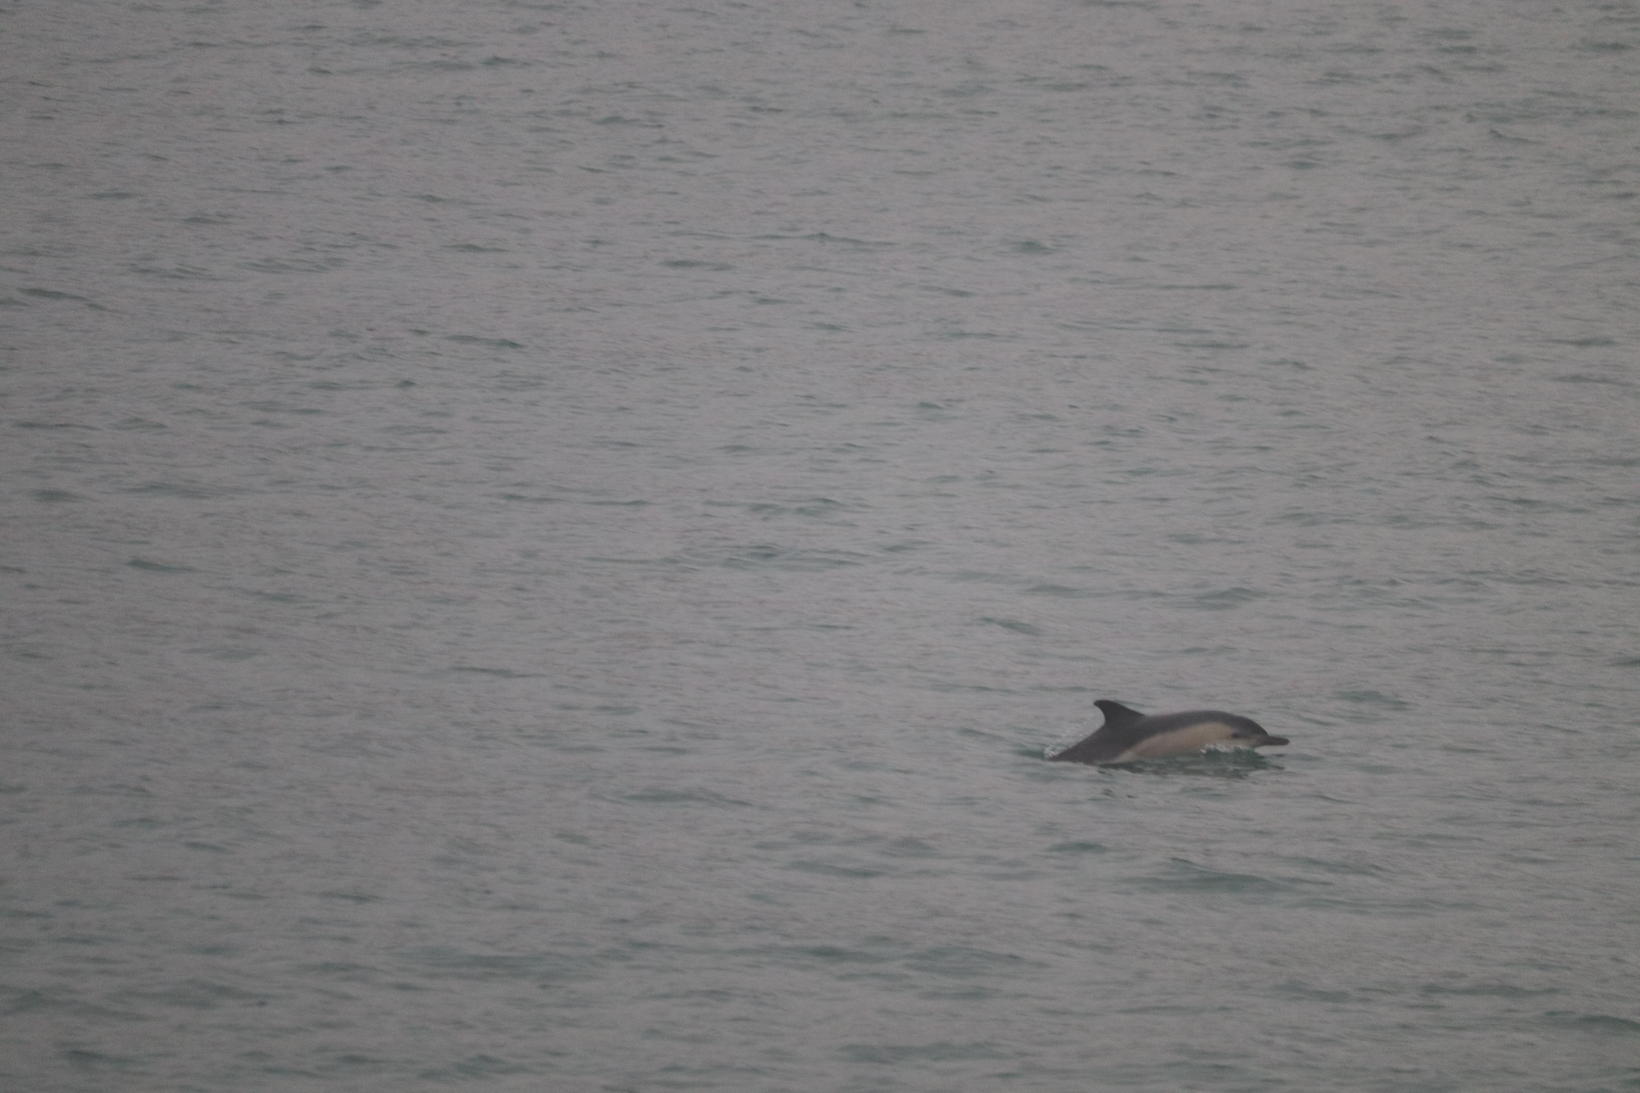 A new species of dolphin has been spotted in Faxaflói